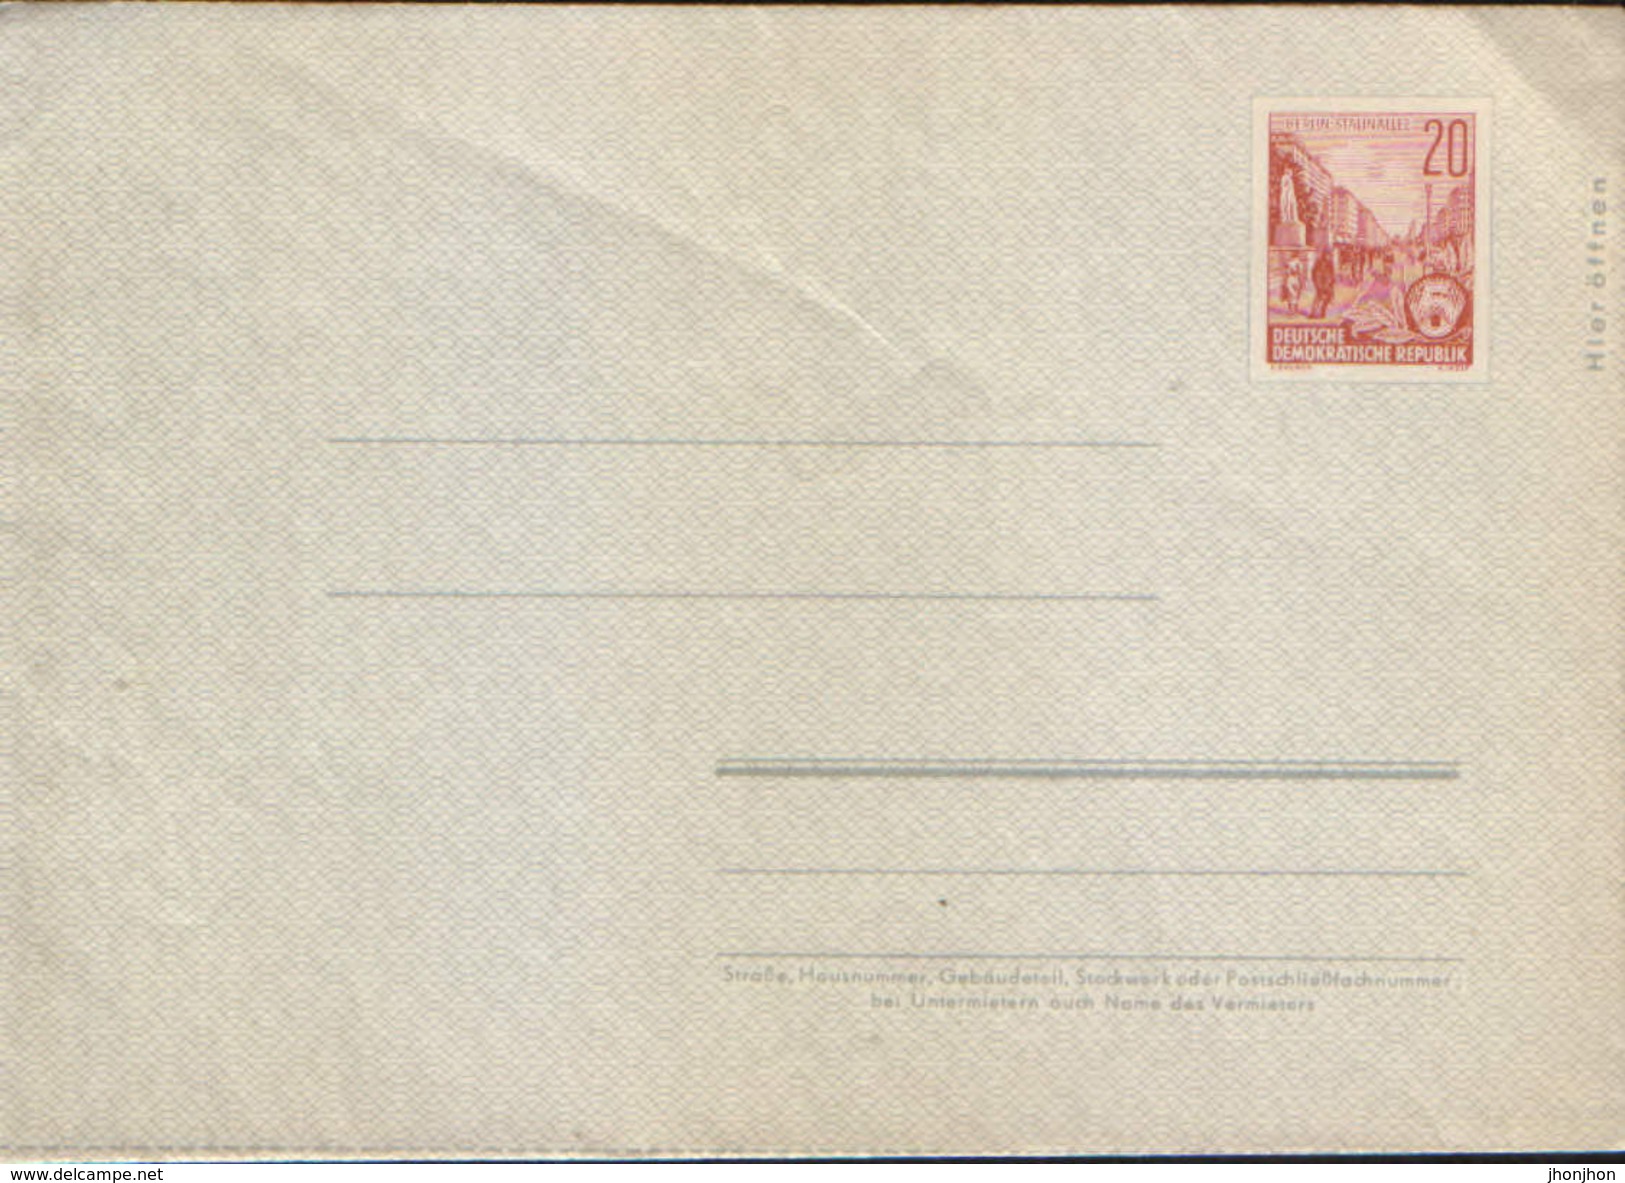 Deutschland/DDR - Postal Stationery Cover Private, Unused - PU 411 - Private Covers - Mint